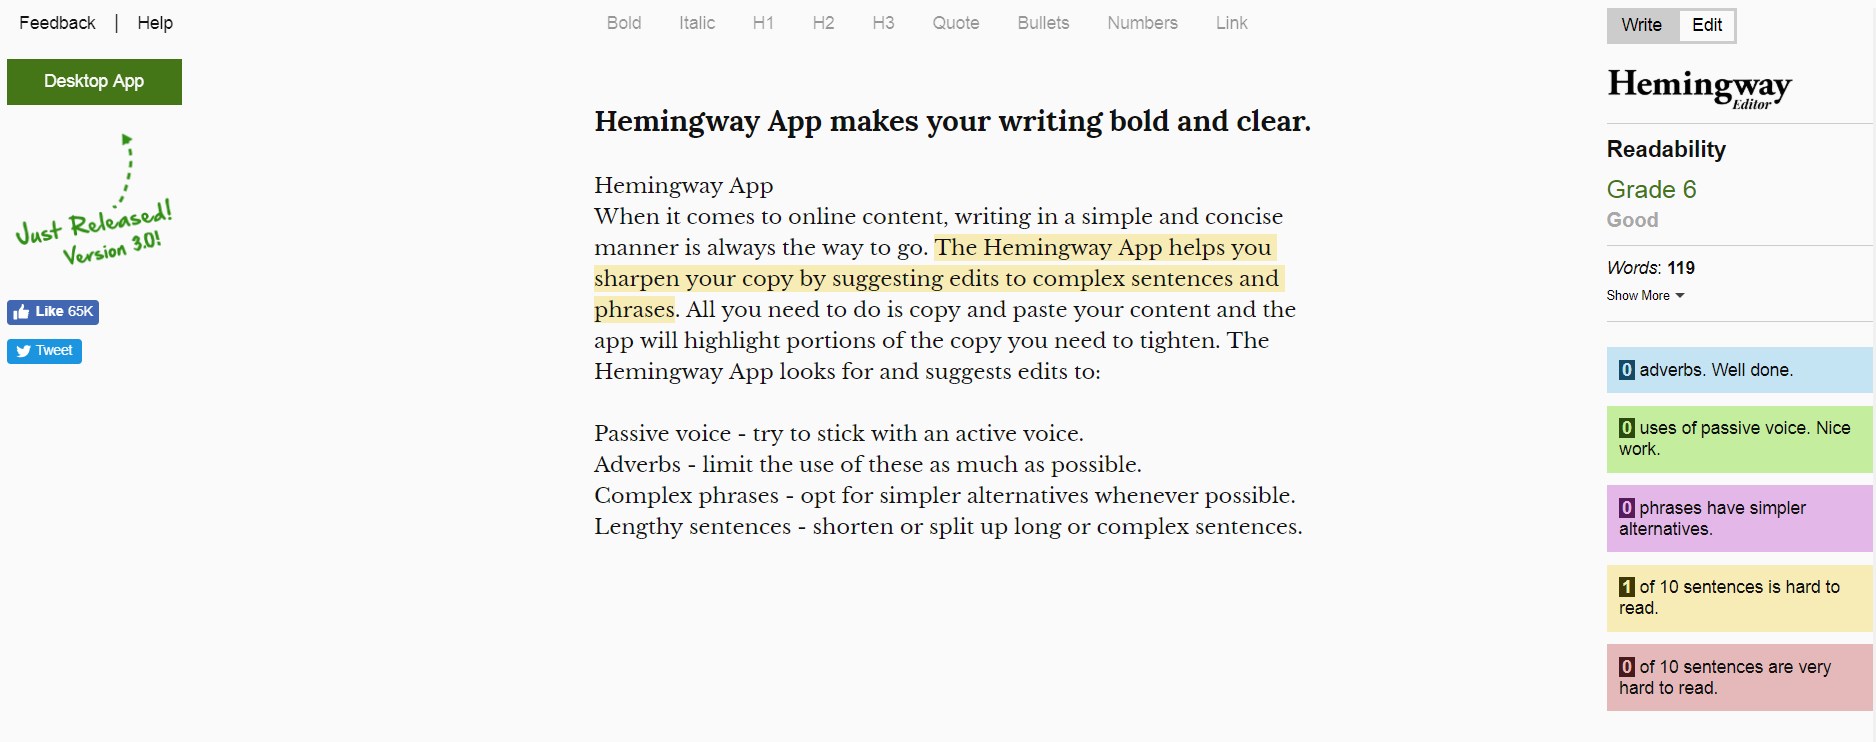 How to sharpen your copy with the Hemingway App